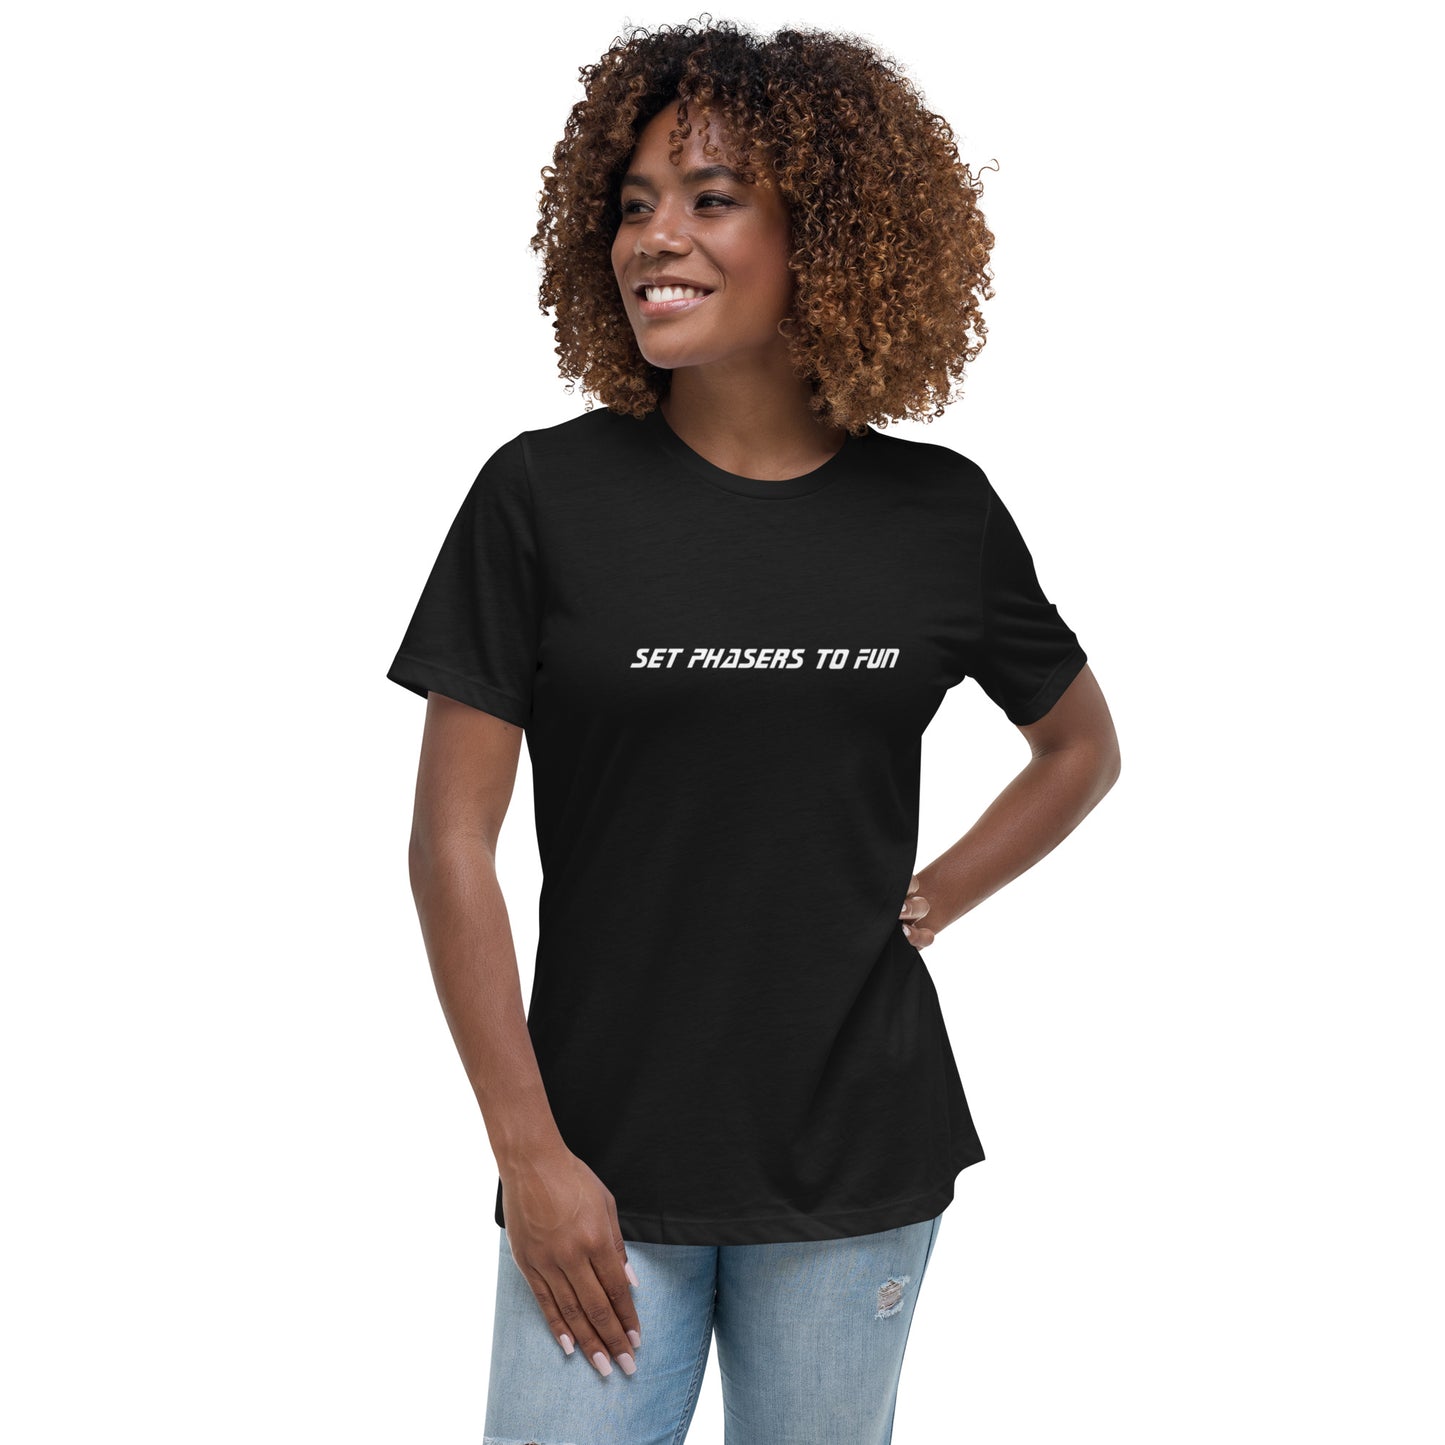 Women's Dark Relaxed T-Shirt - Set Phasers